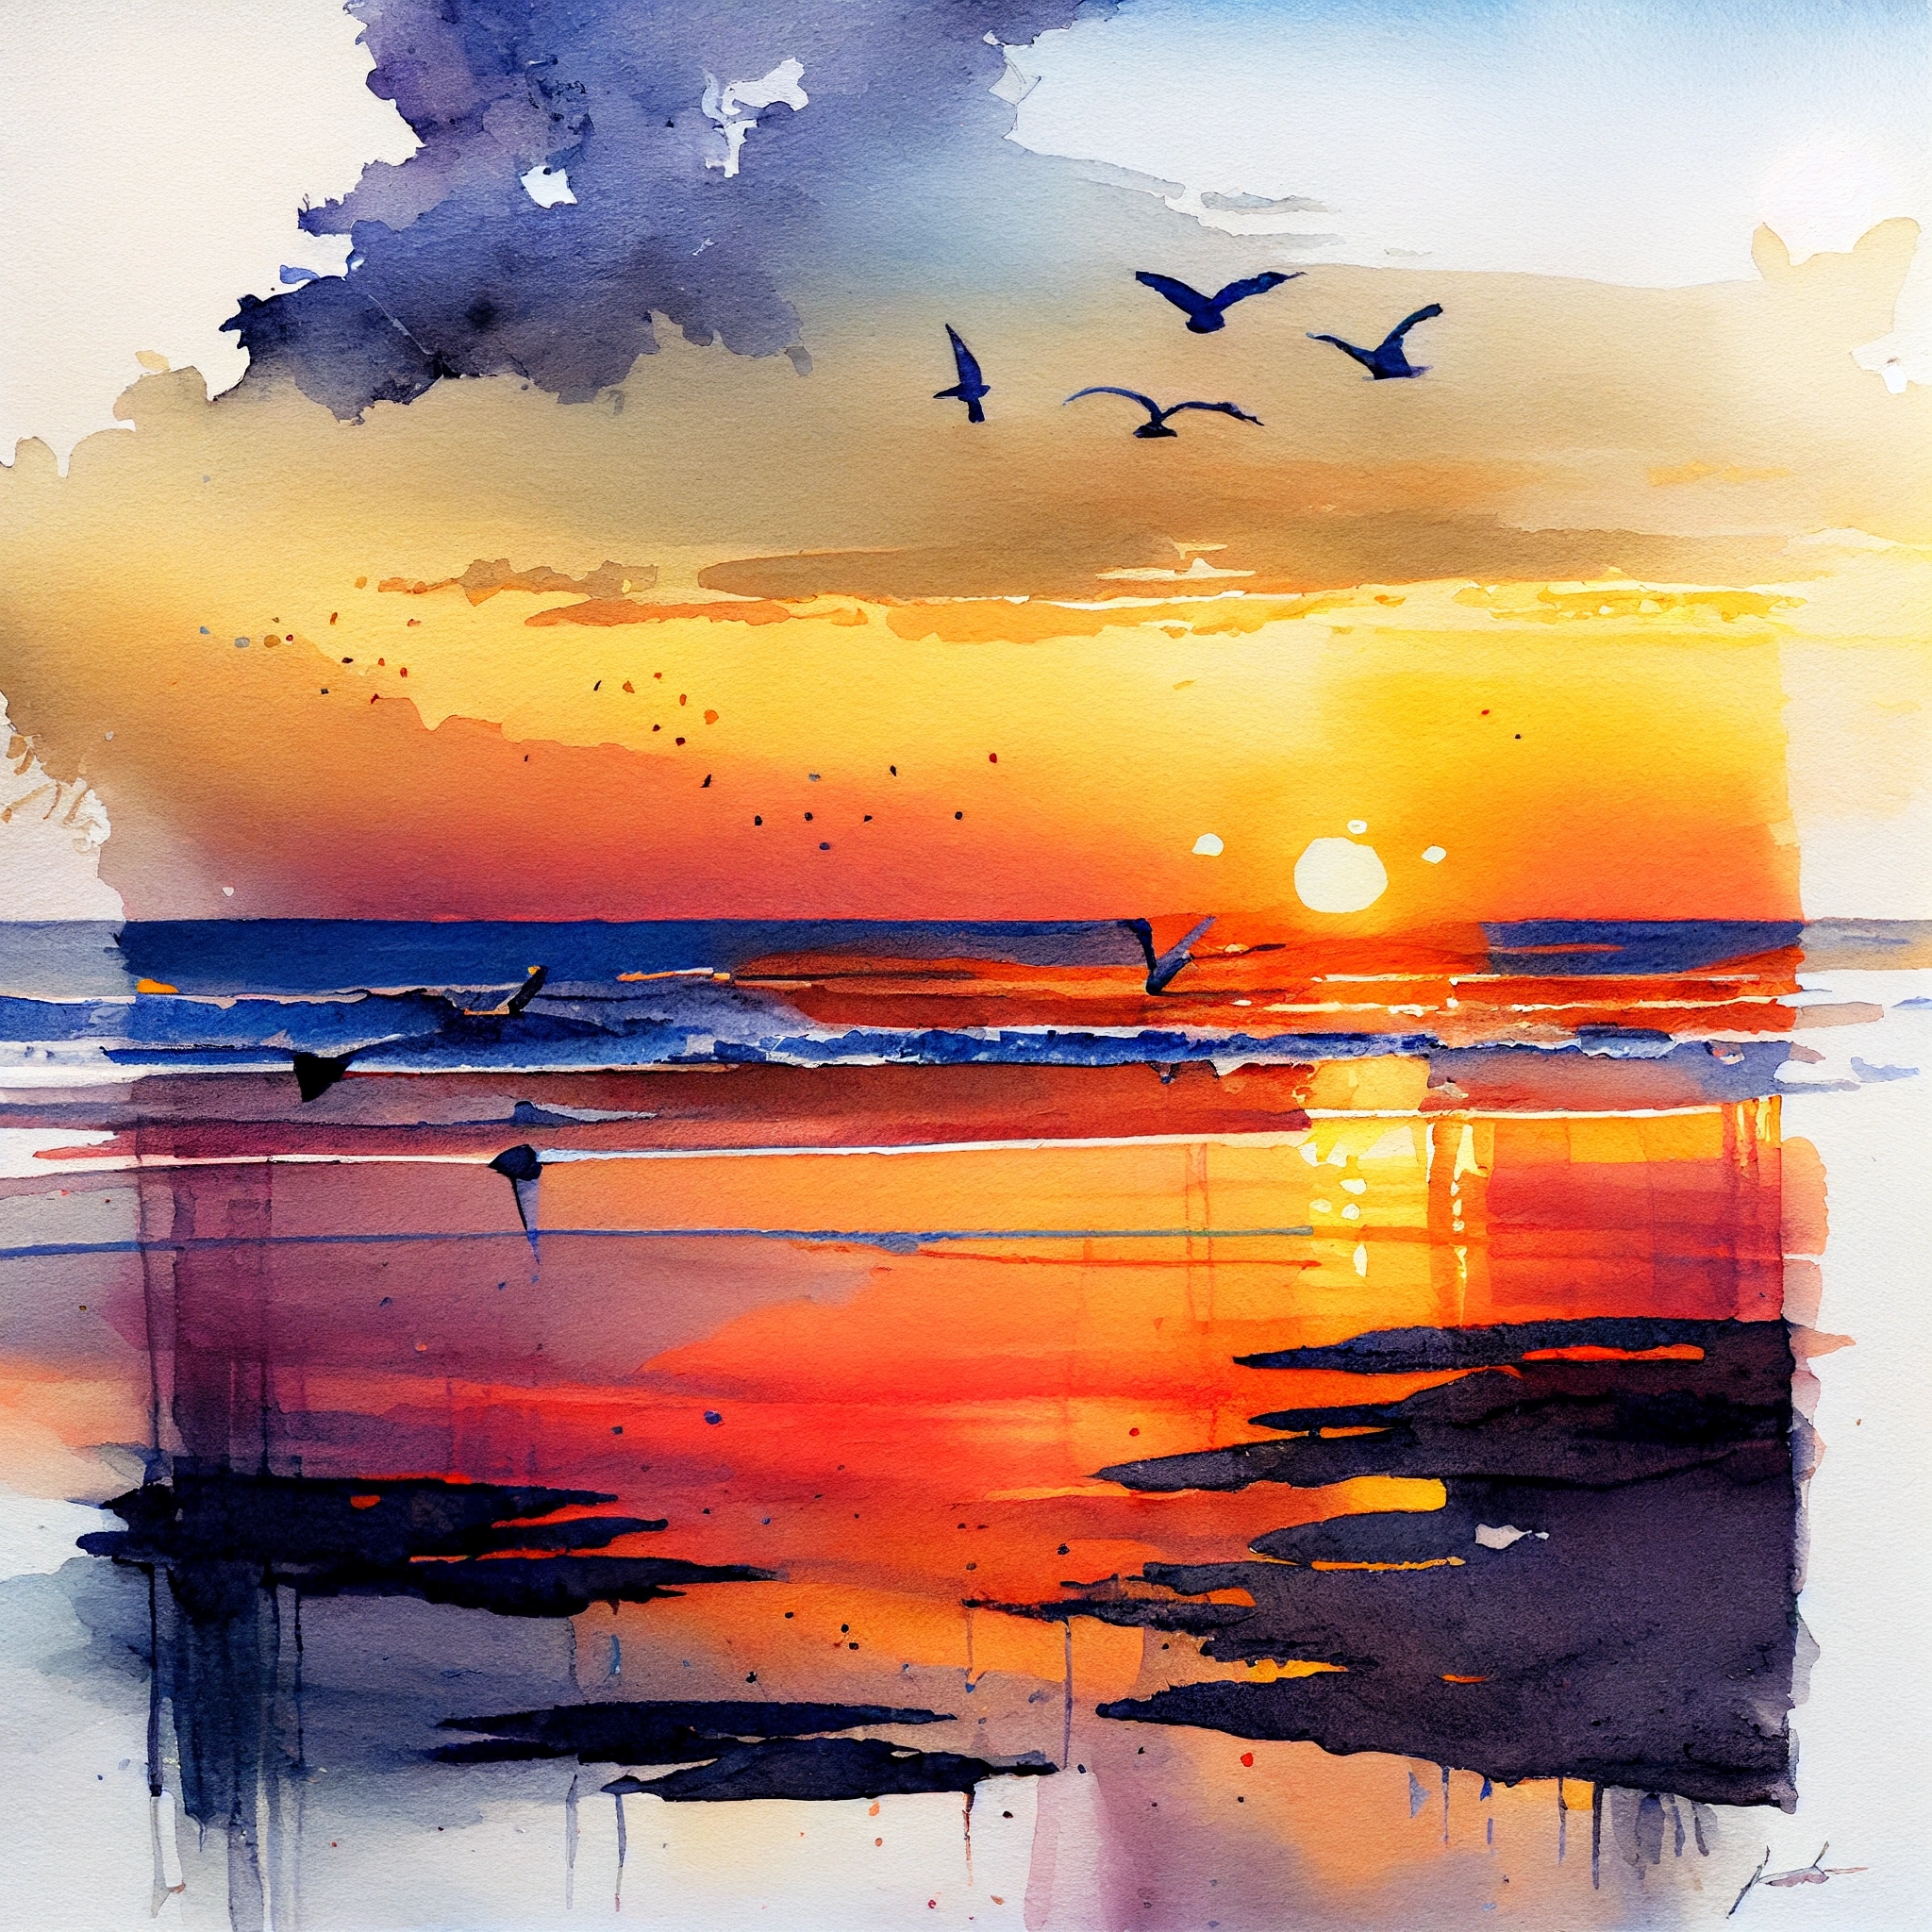 Serene Sunset at the Beach: A Captivating Watercolor Painting Print